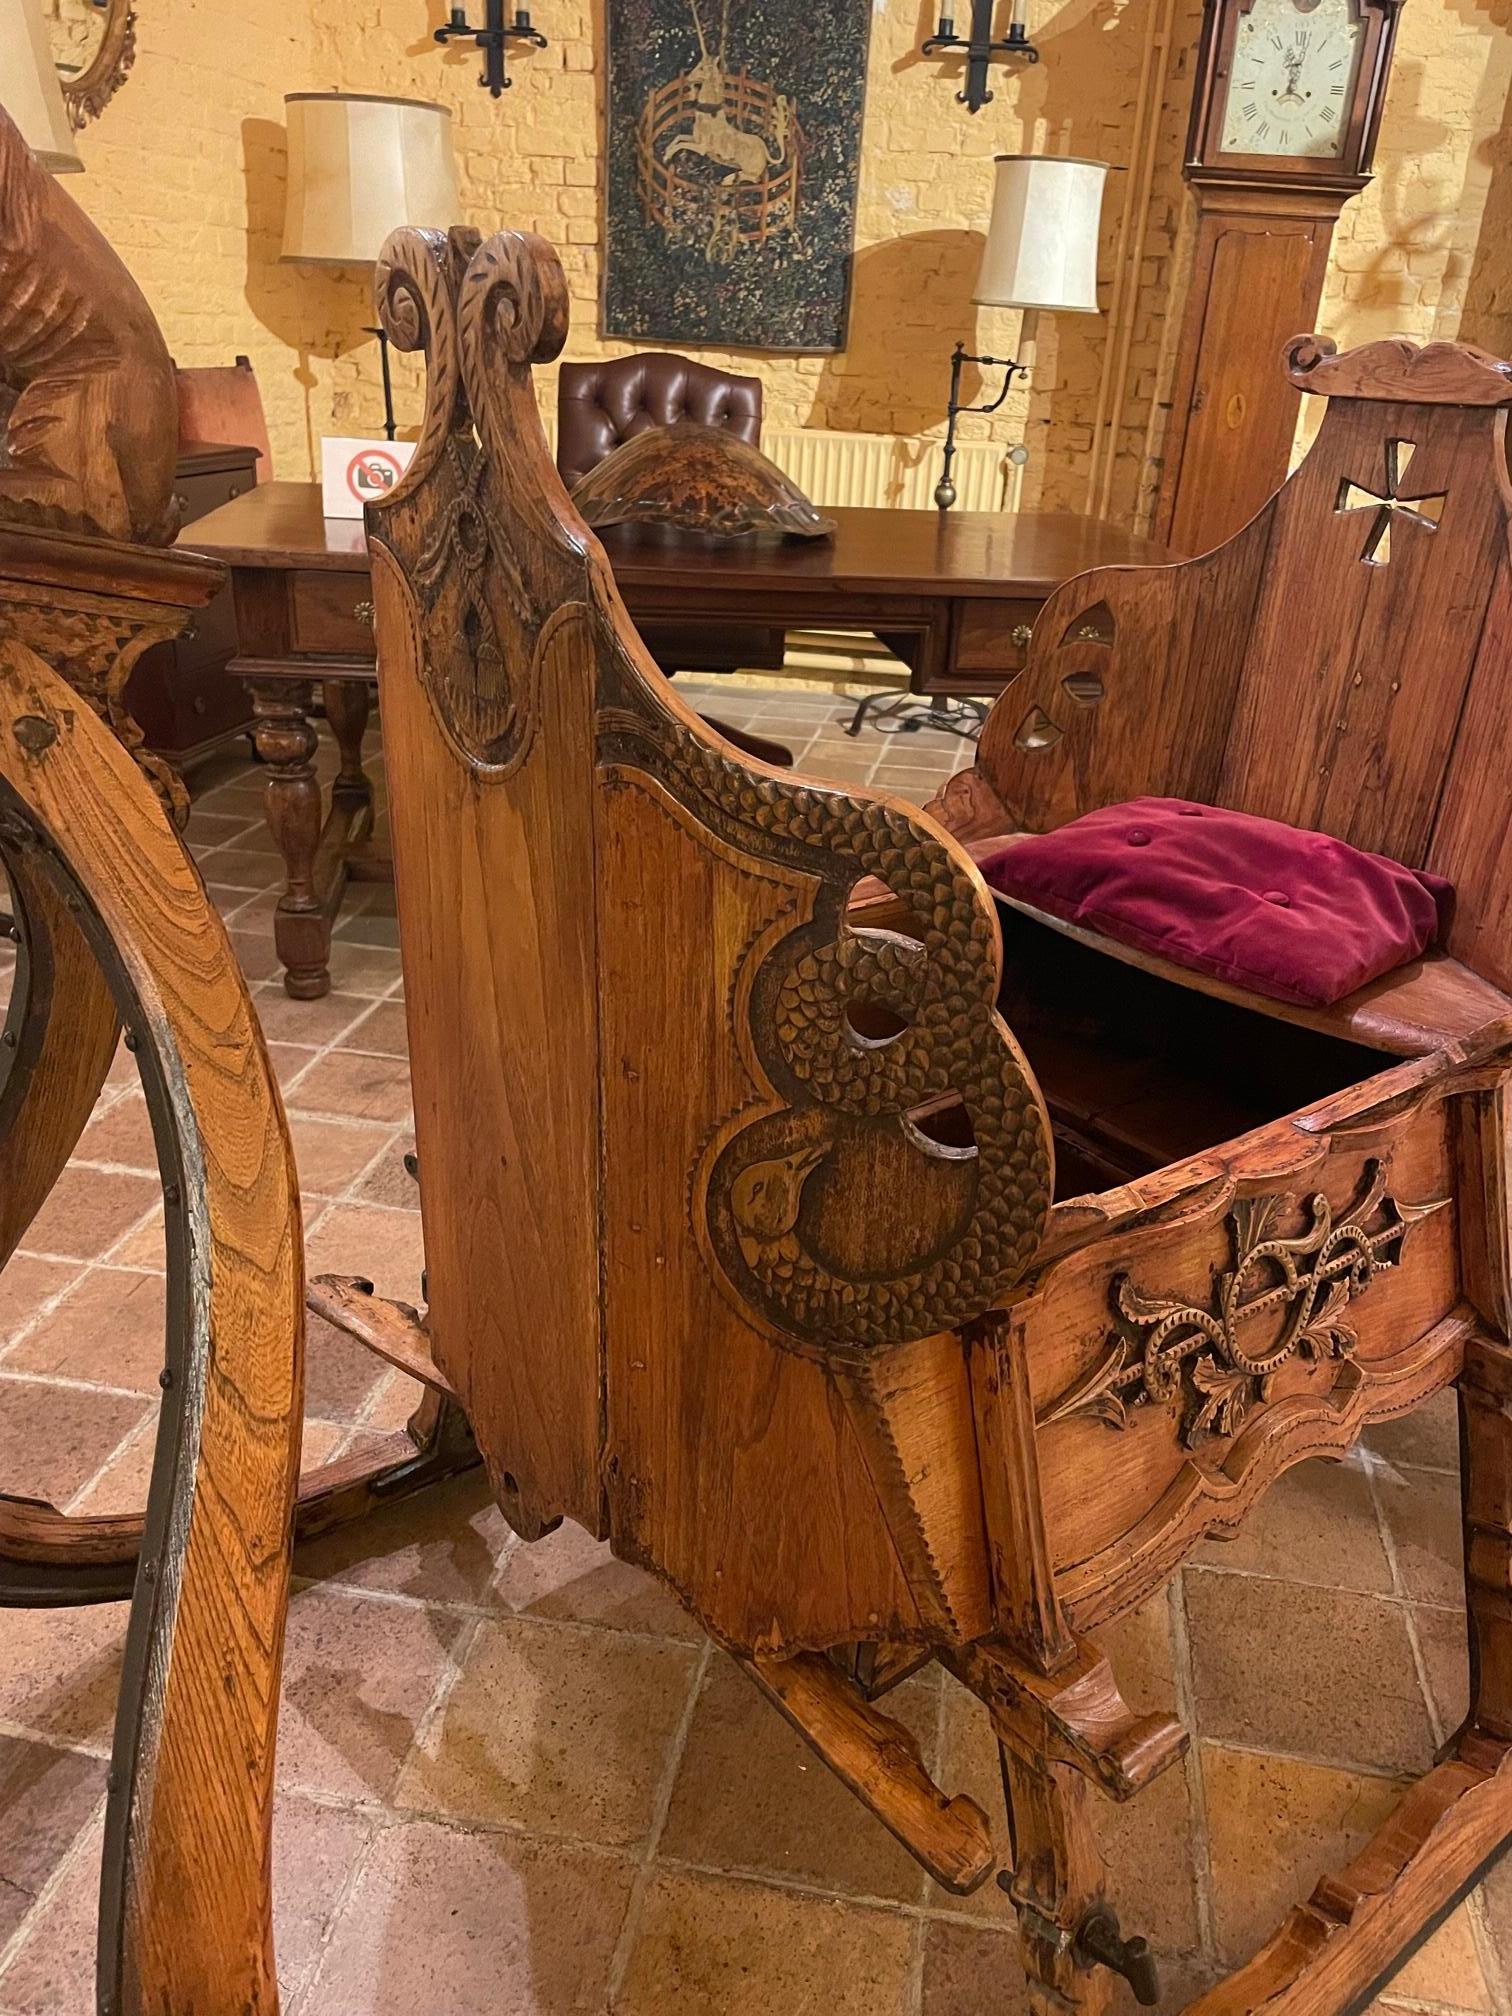 Superb and rare 18th century oak sled in natural wood.

Very beautiful sled decorated with mythological animals.
Beautiful sculptures of great quality.

The driver's seat is covered witha green velvet and the footrest with hammered